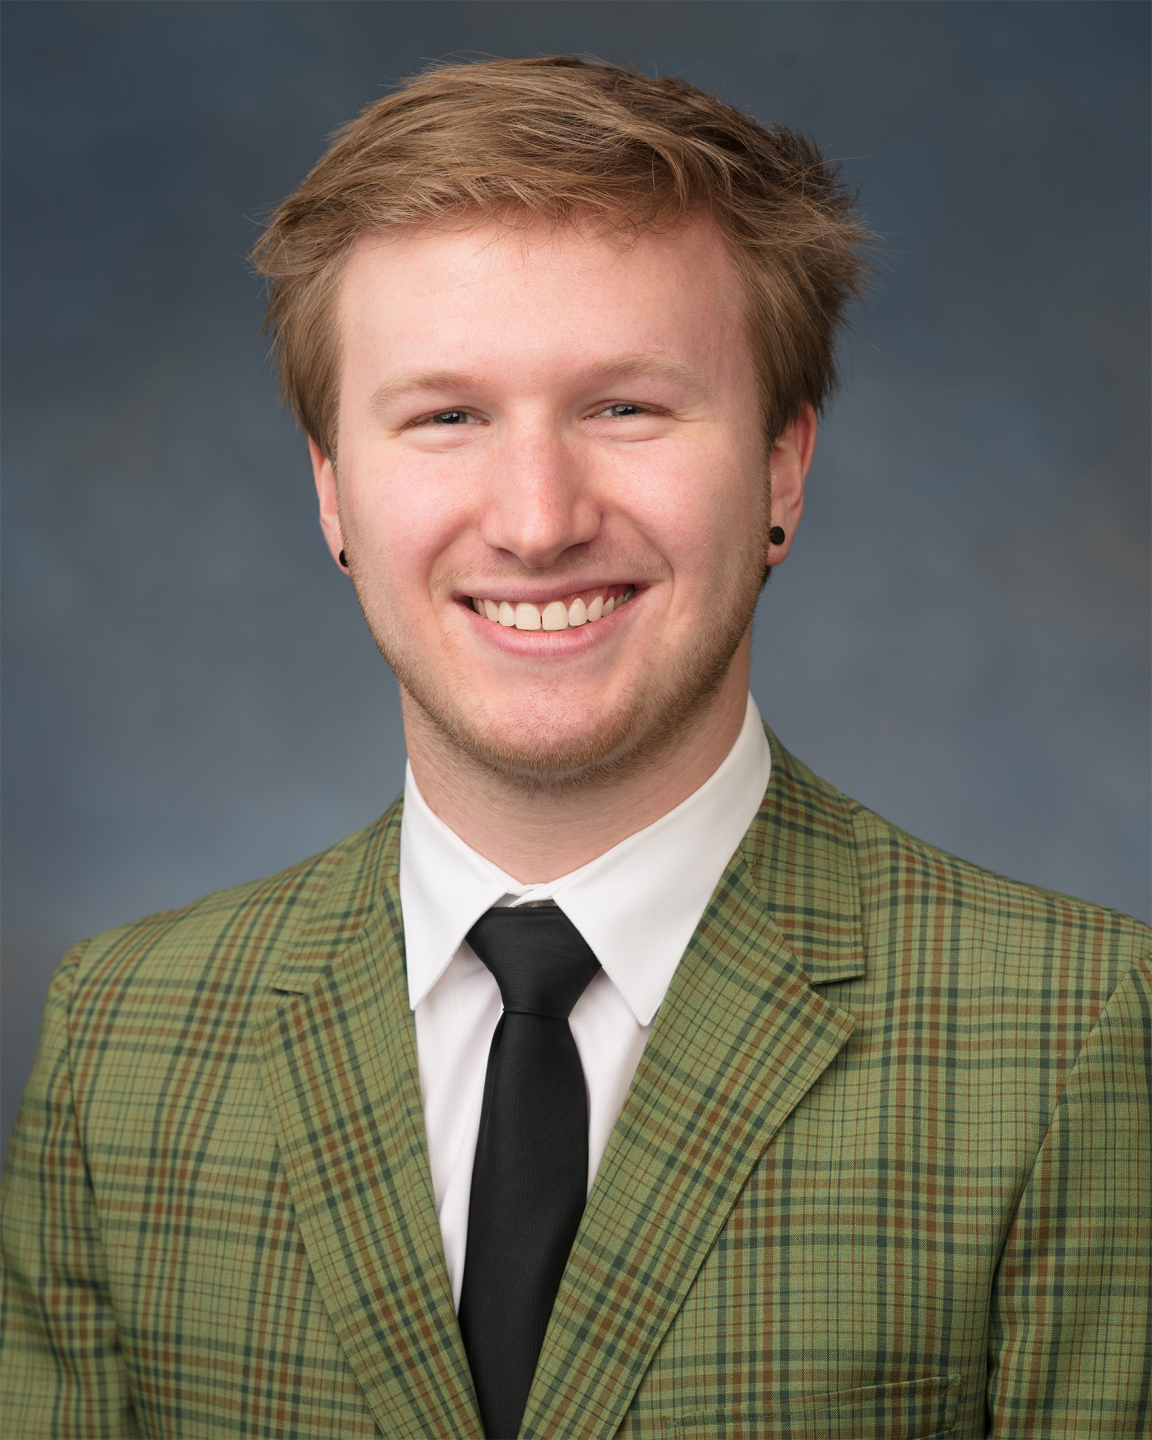 head and shoulders of Tobias Zikmund with short, messy, dirty blonde hair, black dot earrings, pale skin and a big toothy smile; wearing a green striped suit jacket and black tie